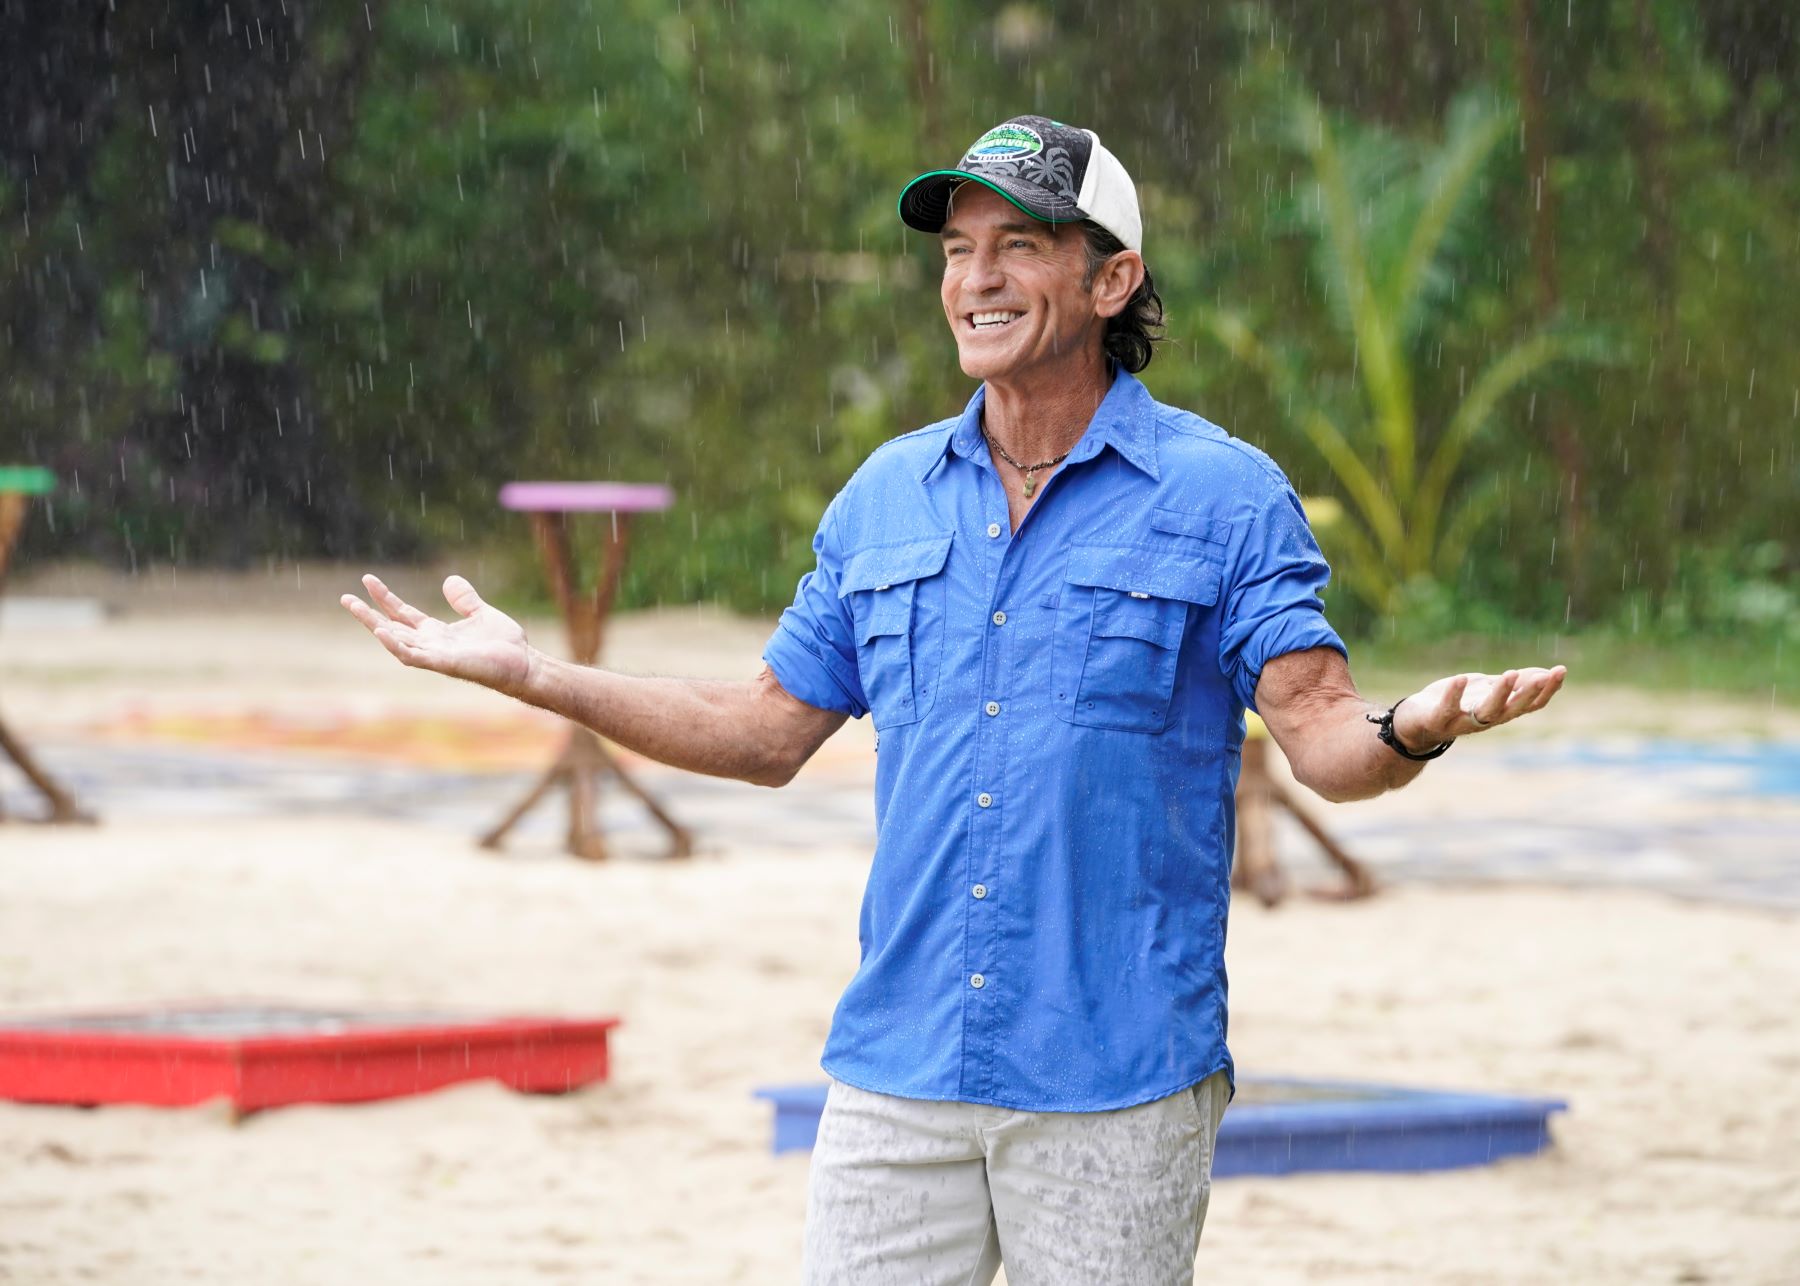 Jeff Probst, who hosts 'Survivor' on CBS, stands in the rain wearing a light blue shirt, tan shorts, and a black, white, and green 'Survivor' baseball cap.